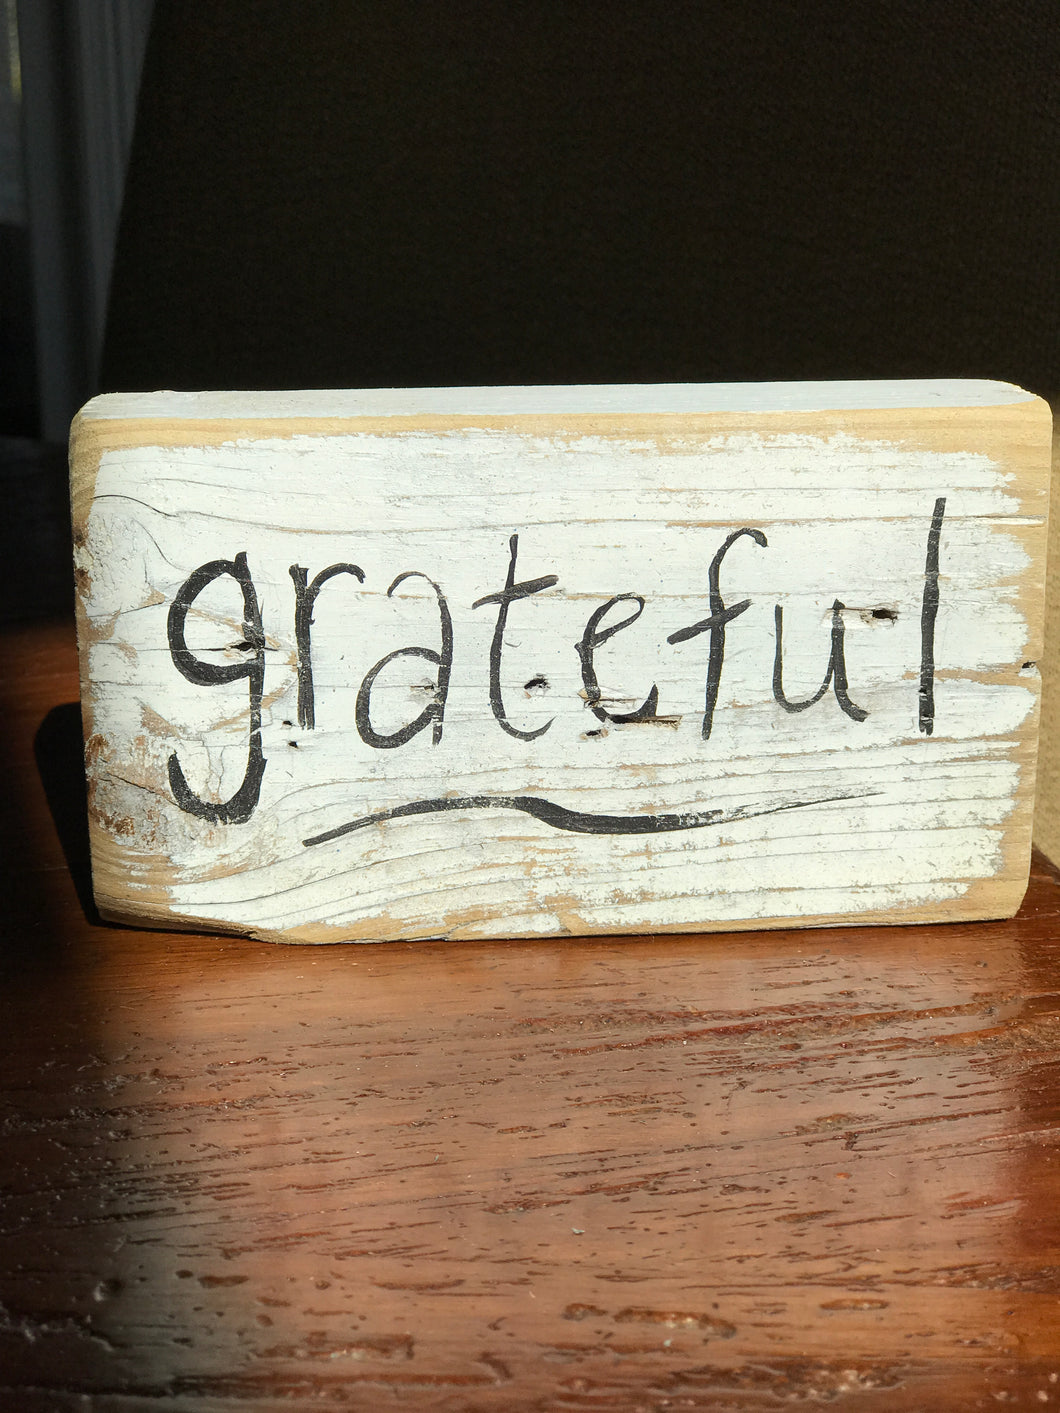 Grateful - Upcycled Hand-painted Wood Block